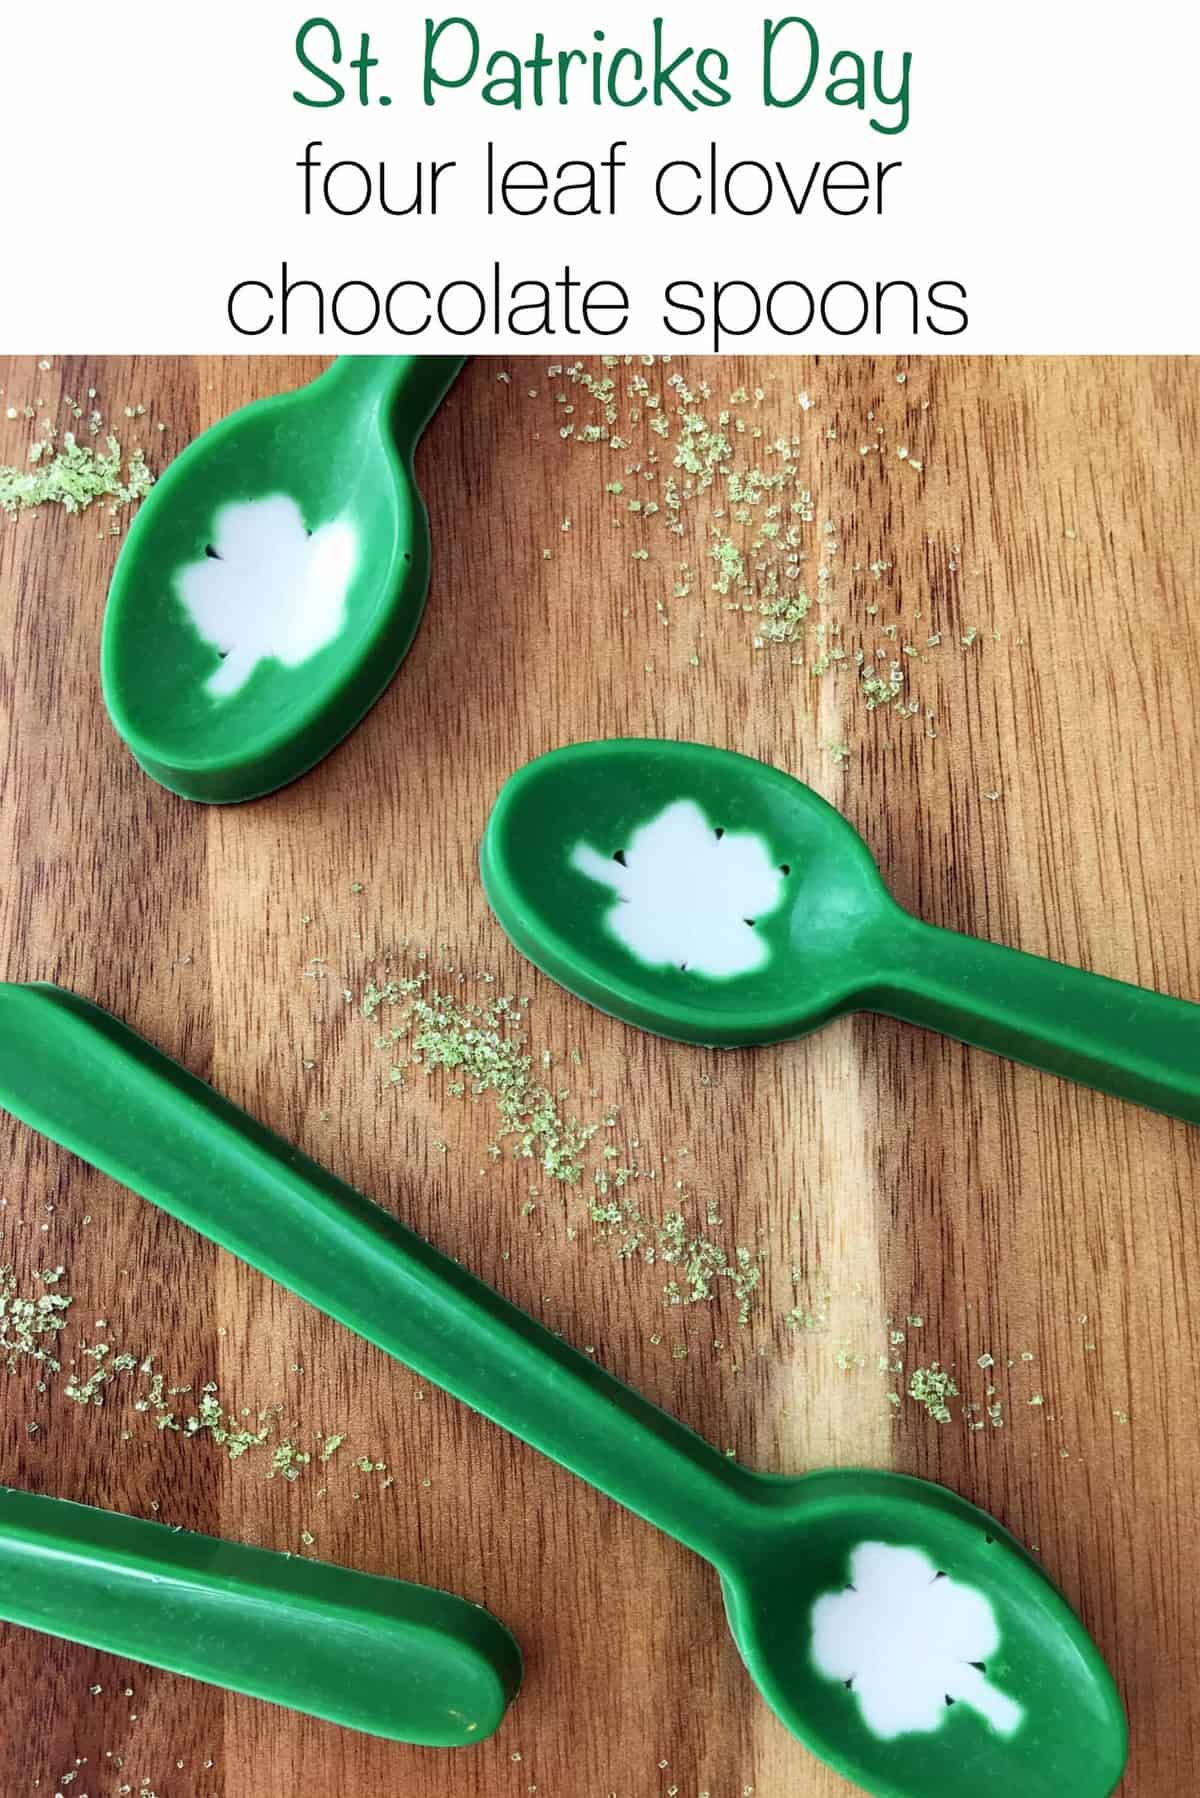 Four Leaf Clover Chocolate Spoons - Perfect for St. Patrick's Day